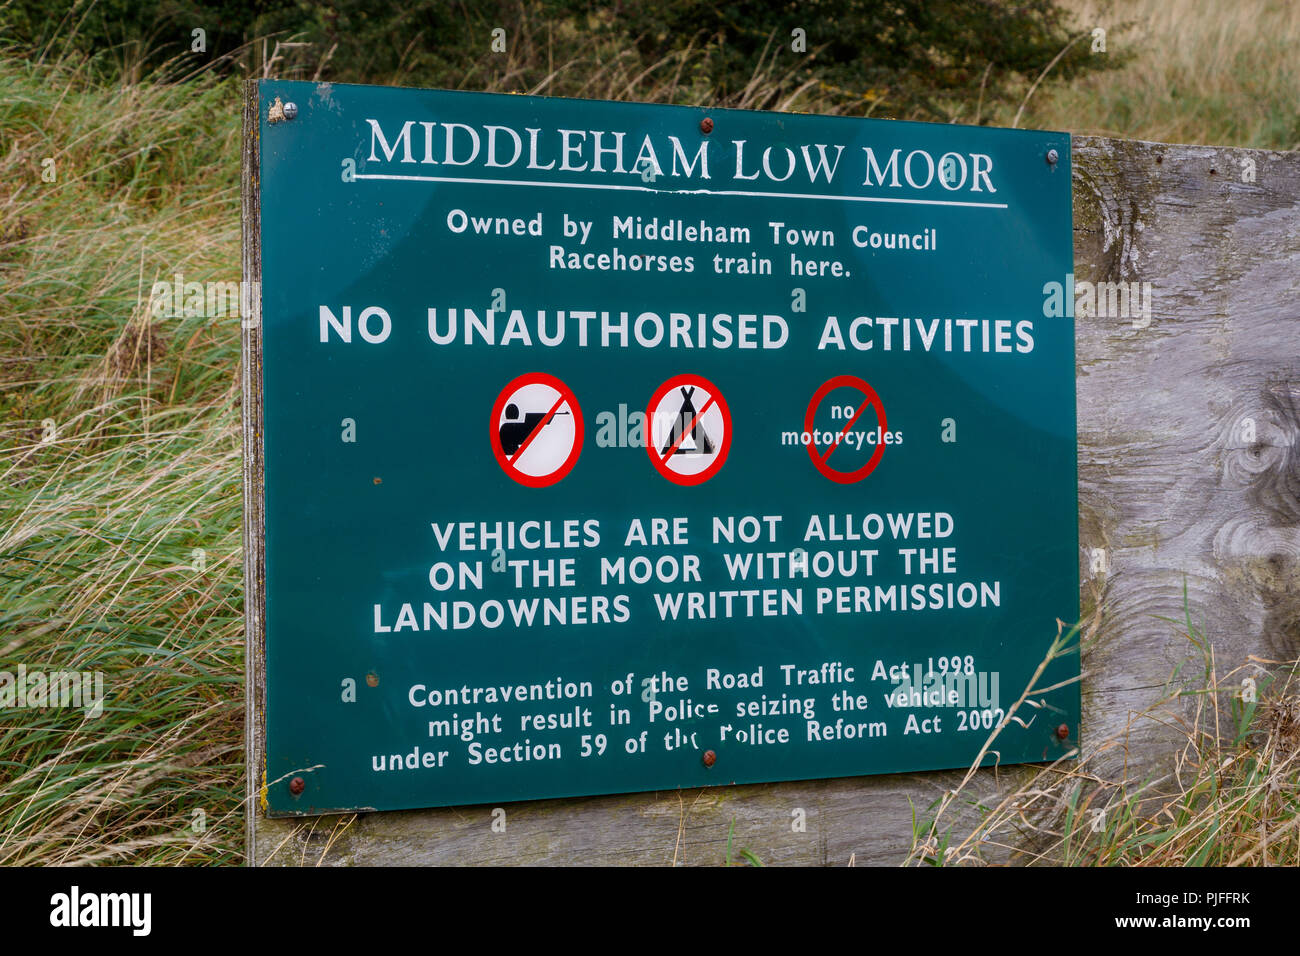 A notice board on Middleham Low Moor regarding the restrictions on activities in the area, Yorkshire, UK. Stock Photo